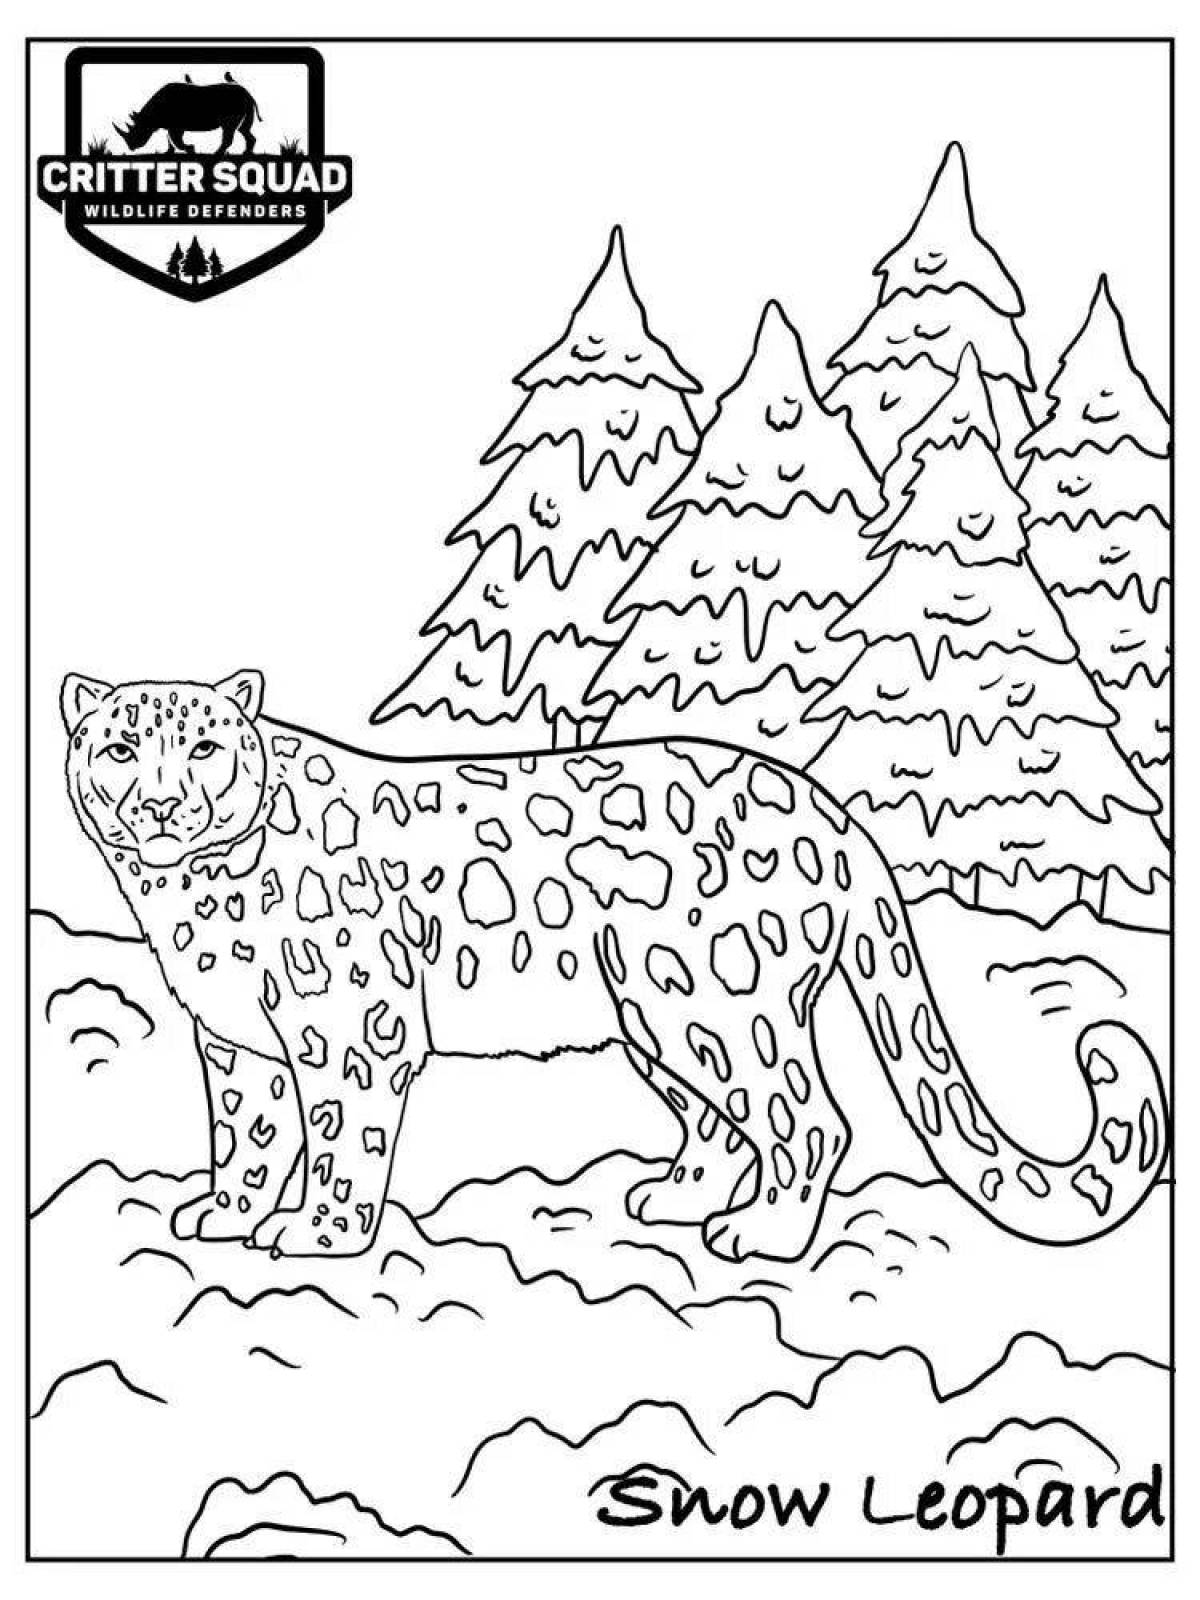 Amazing Snow Leopard coloring page